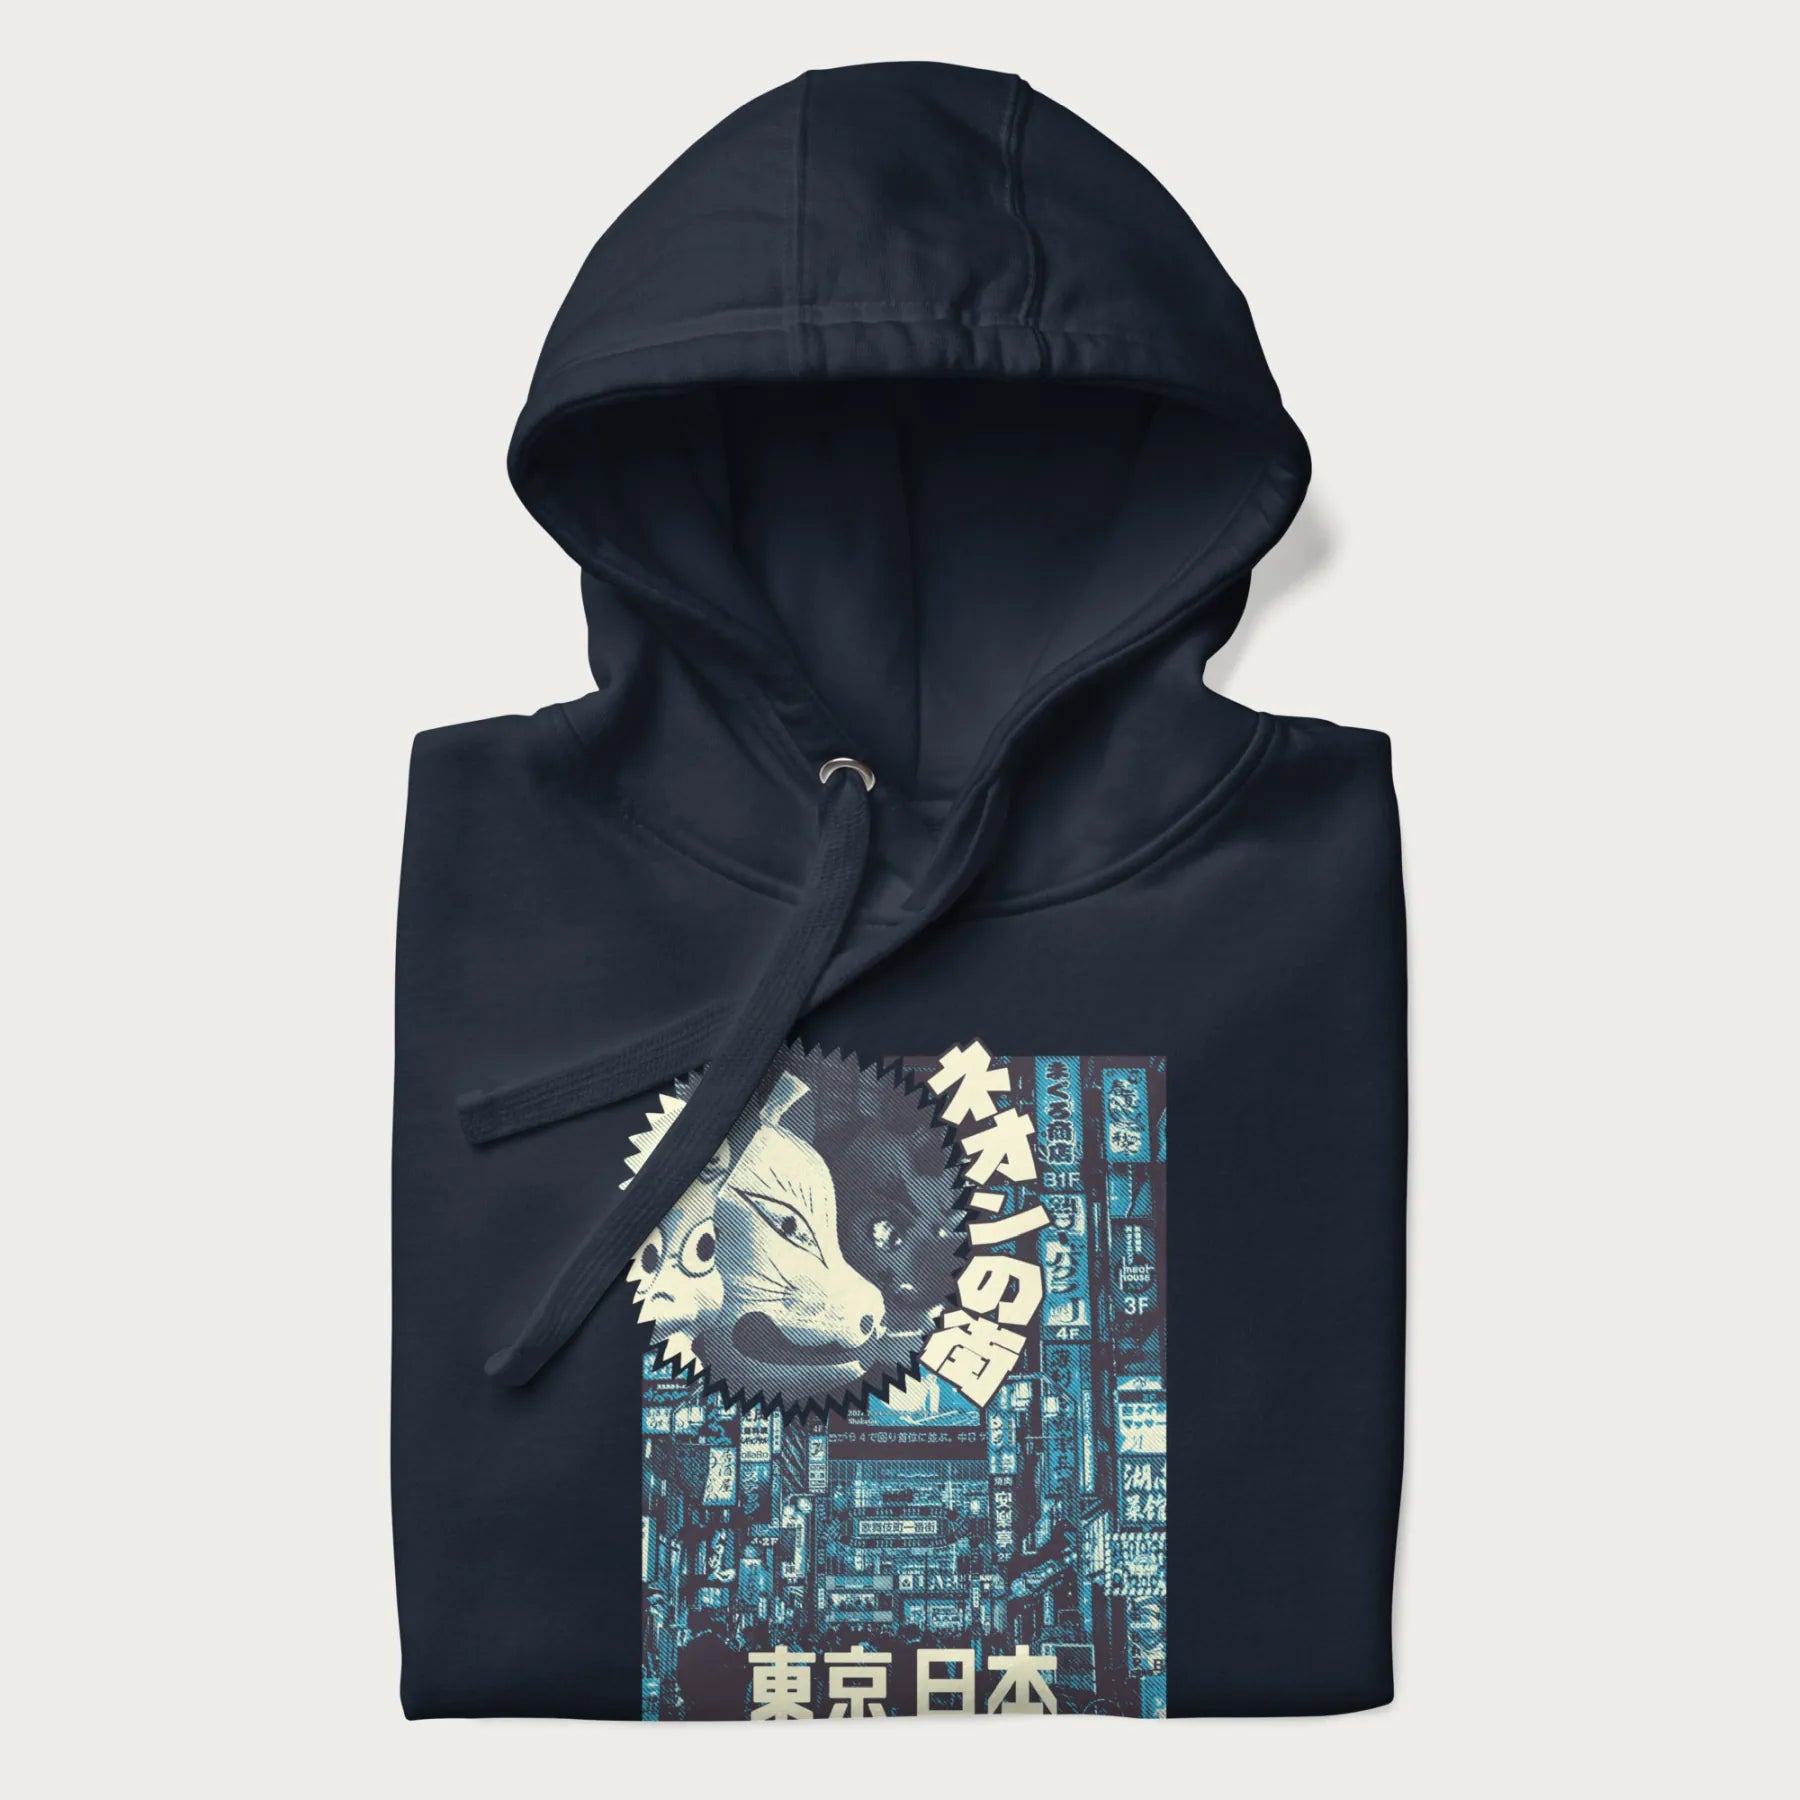 Folded navy blue hoodie with Japanese text '東京日本' translating to 'Tokyo, Japan', with three traditional Japanese masks over a neon-lit Tokyo background.